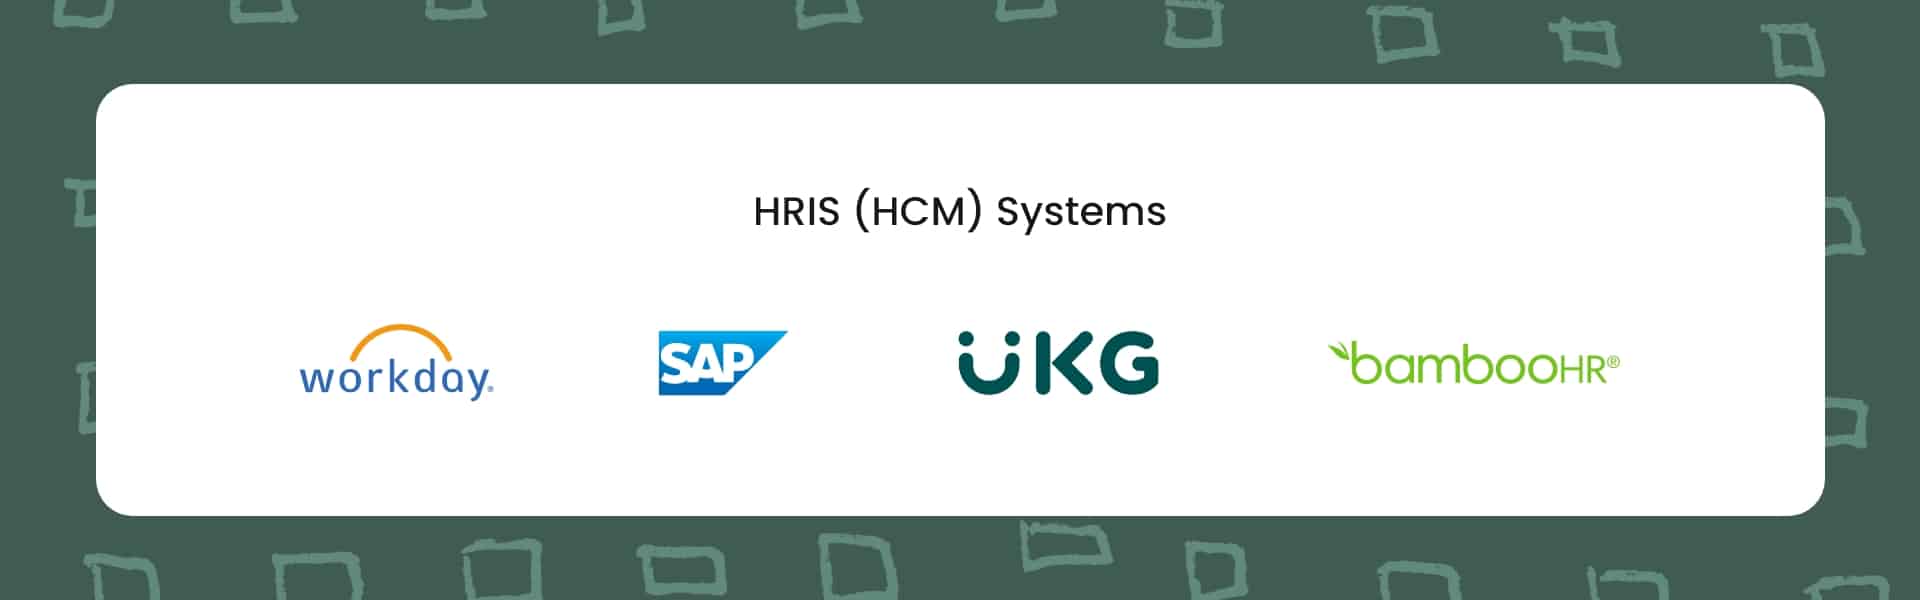 HRIS Systems provider icons